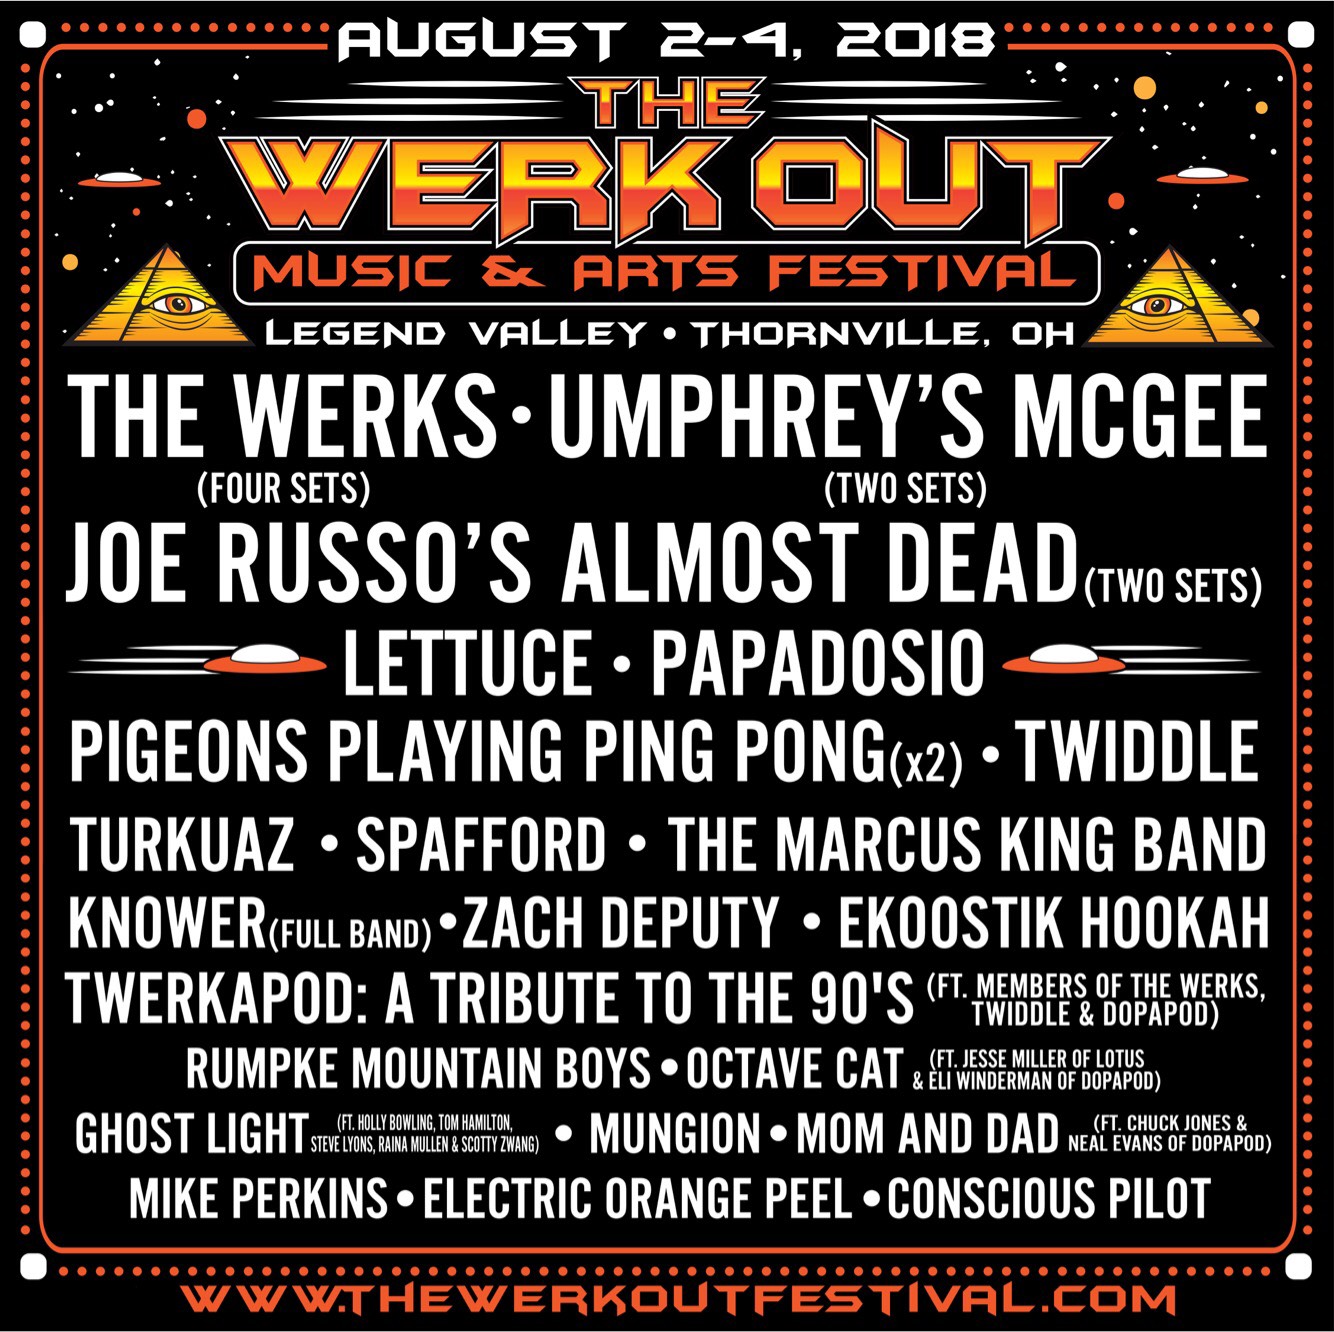 Initial Artist Lineup | The Werk Out Music And Arts Festival 2018